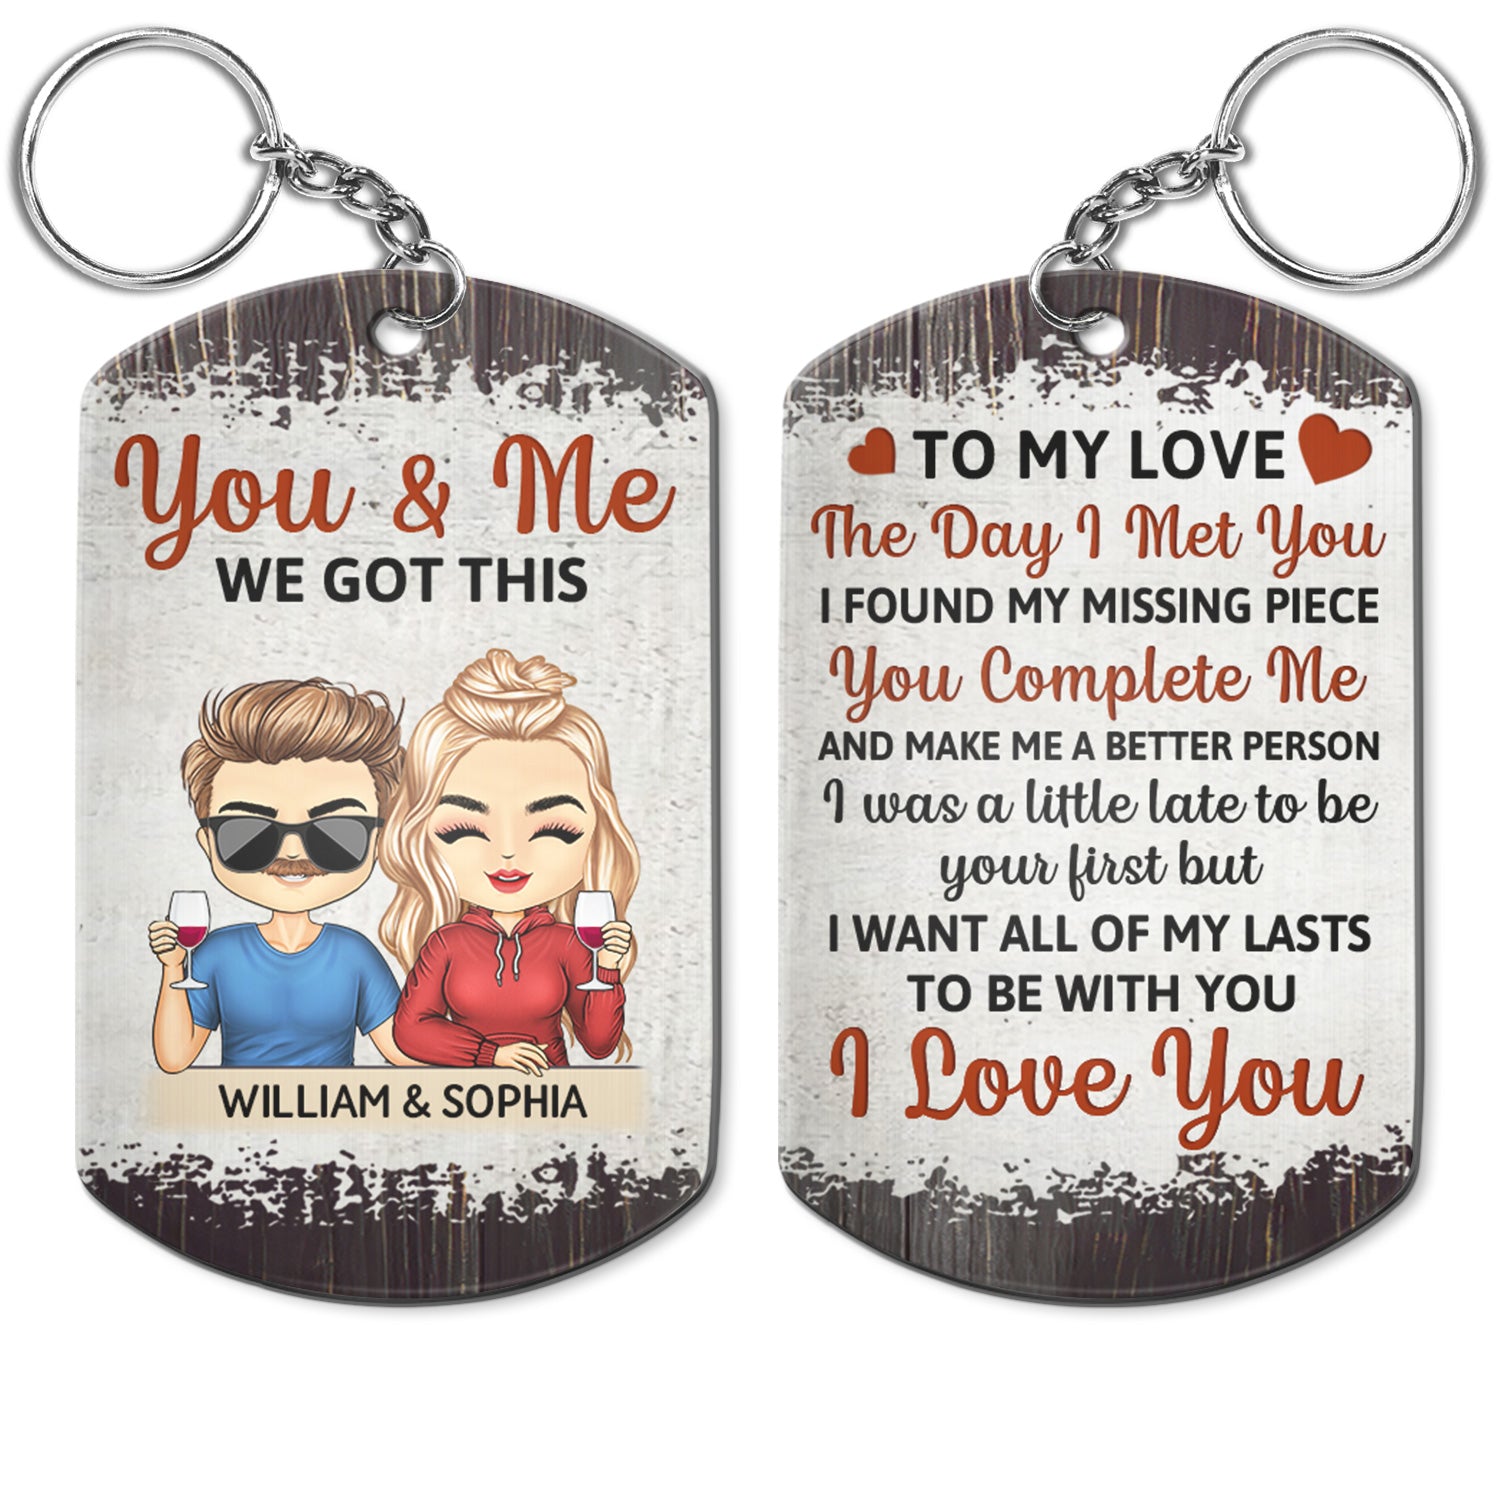 The Day I Met You - Anniversary, Loving Gifts For Couples, Husband, Wife - Personalized Aluminum Keychain